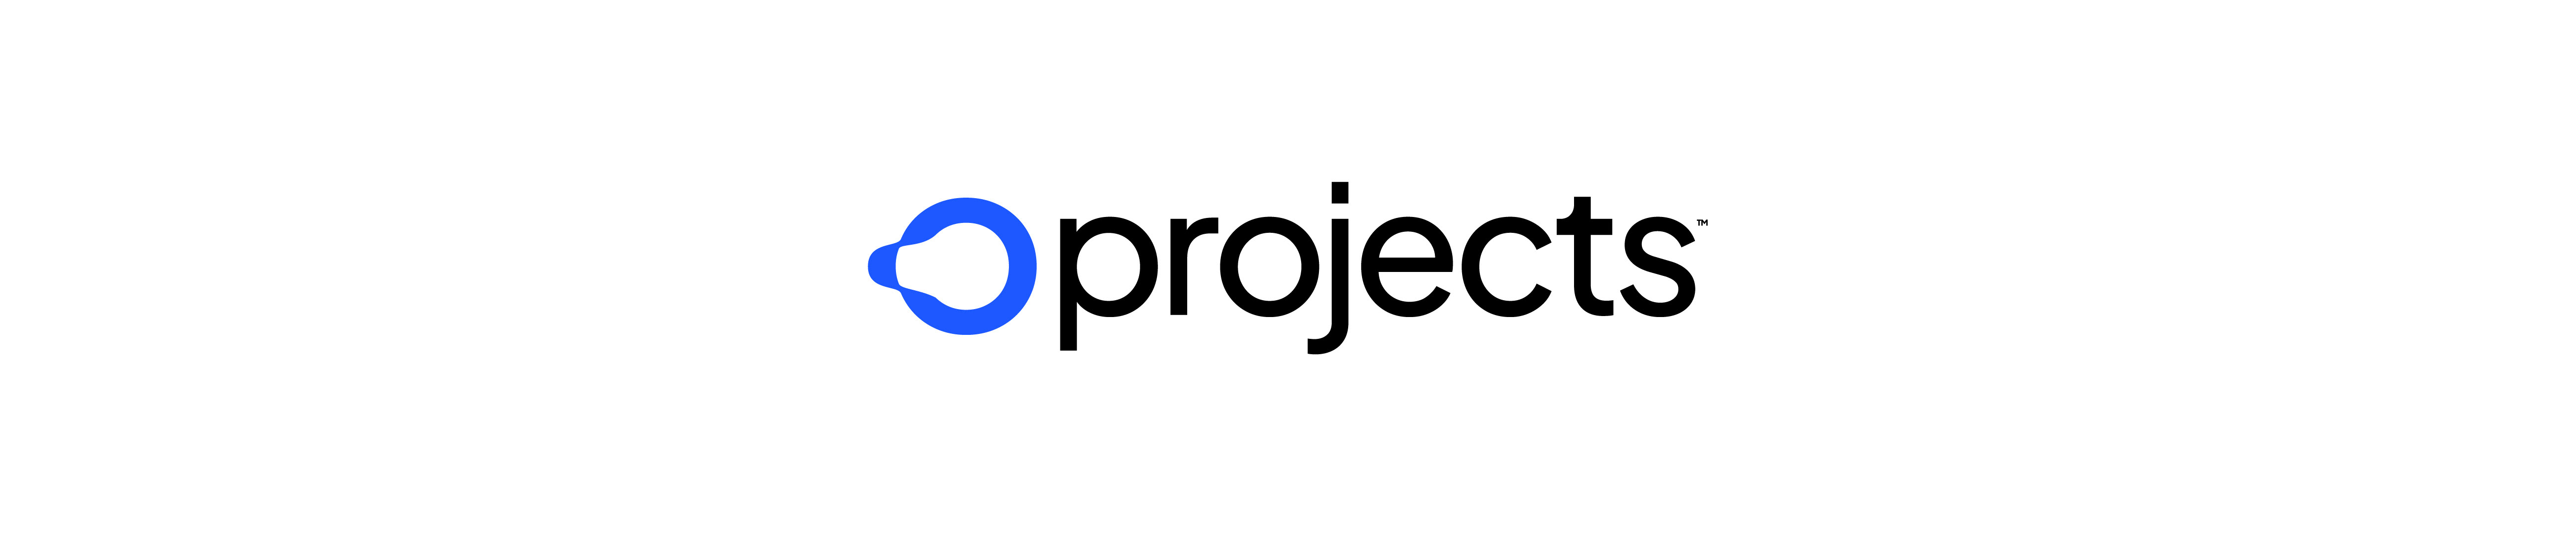 O-Projects Egypt's profile banner